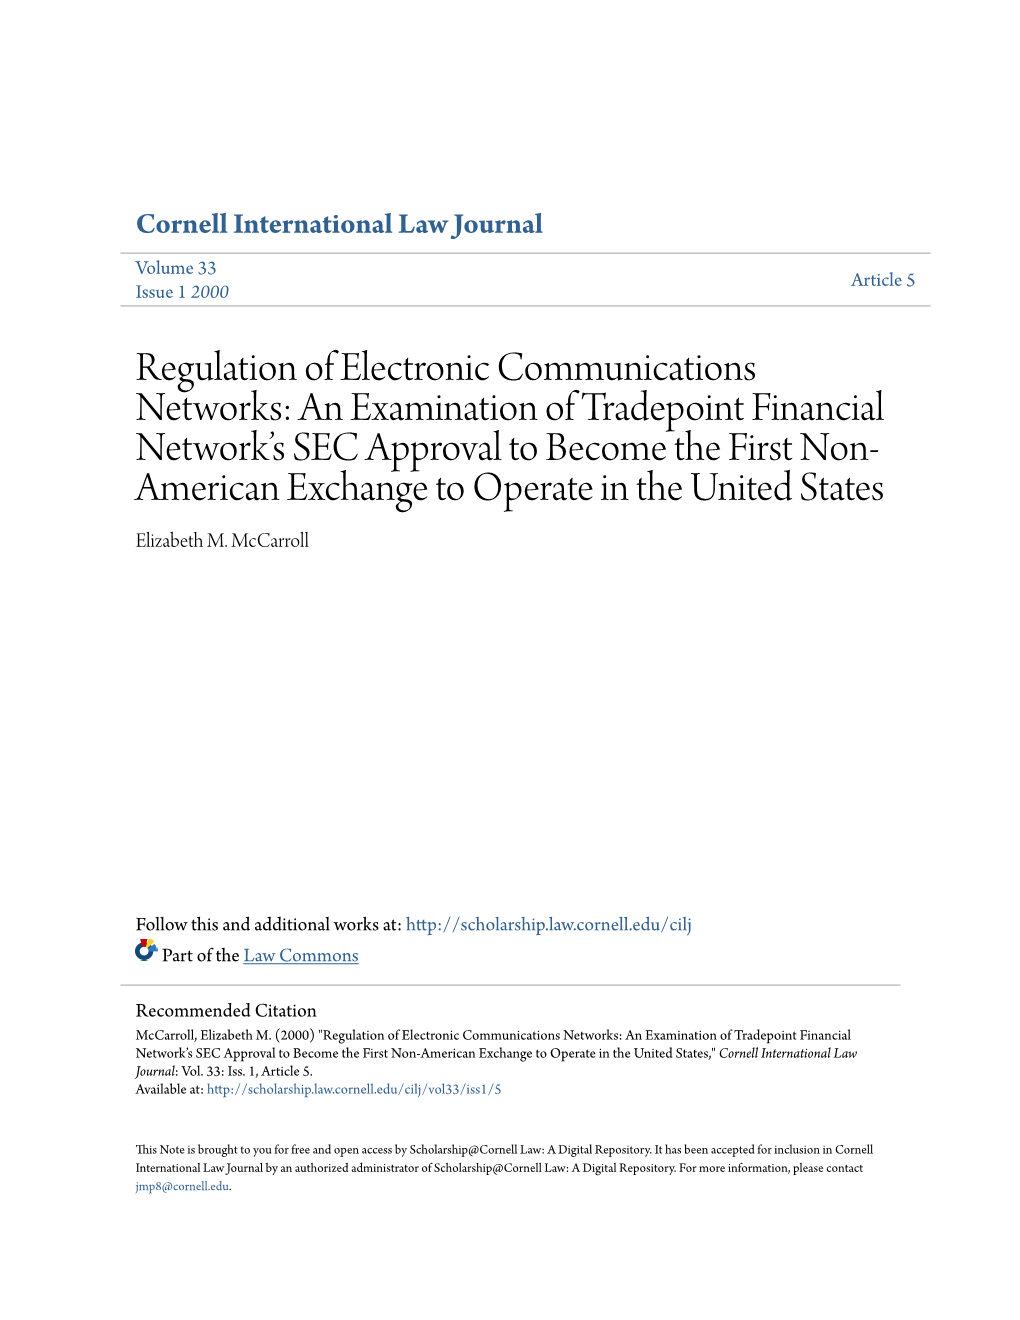 Regulation of Electronic Communications Networks